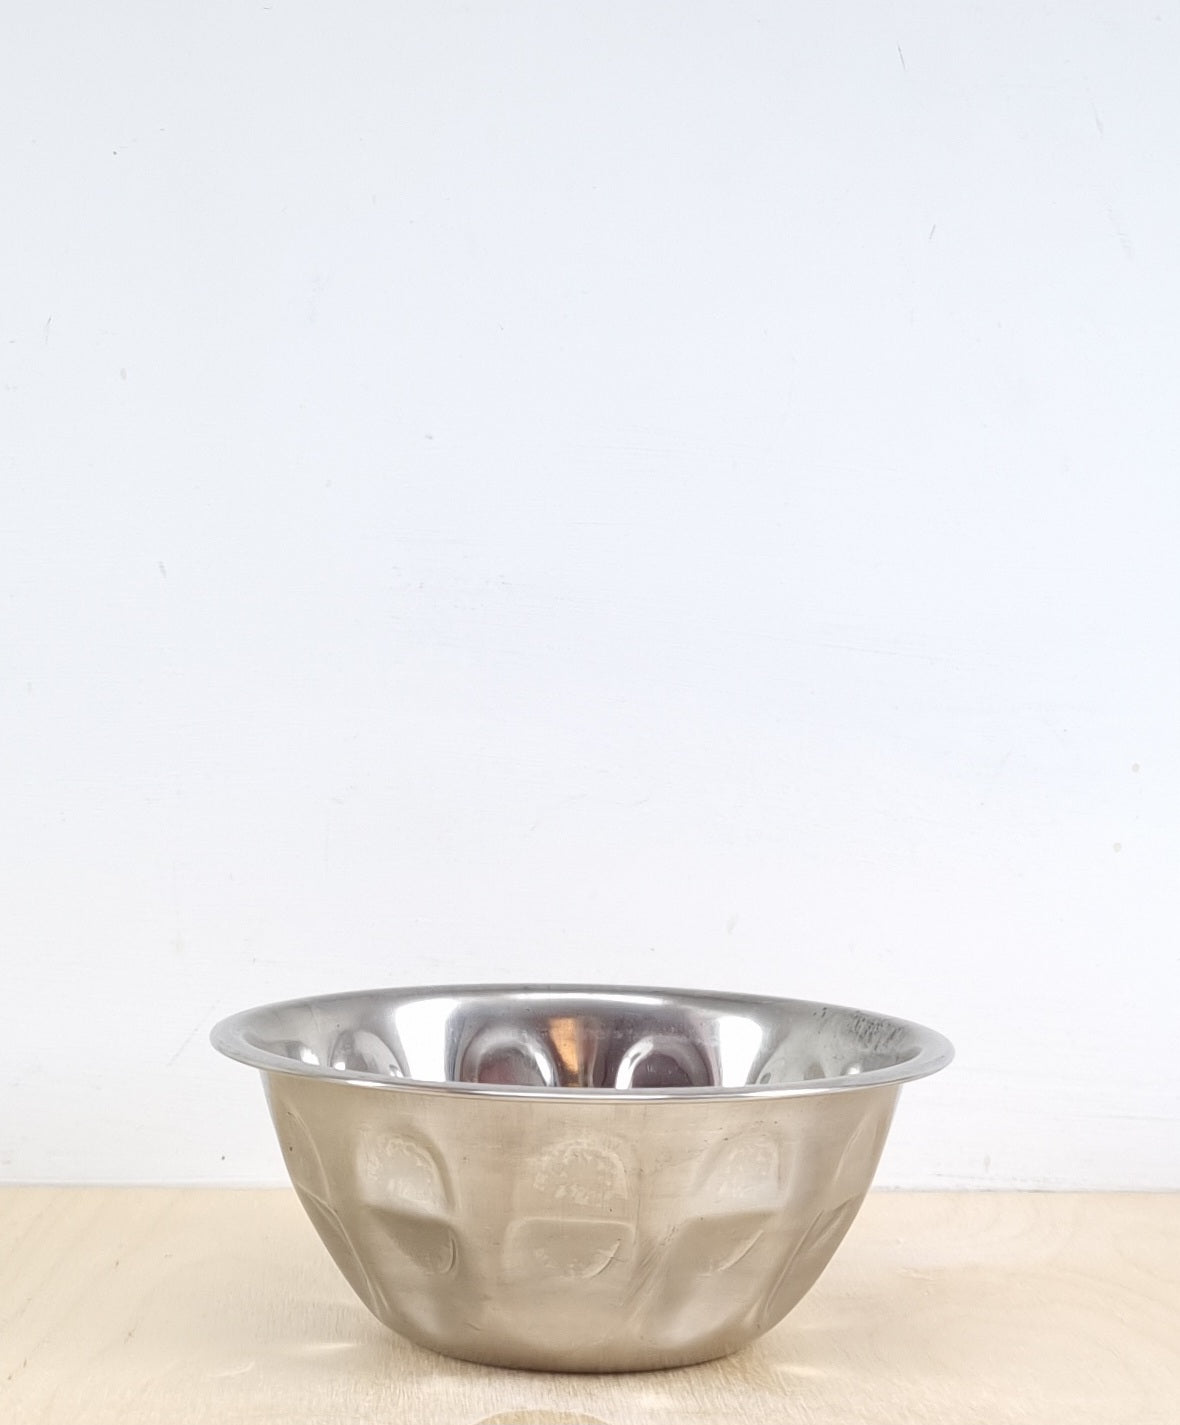 Small stainless steel bowl